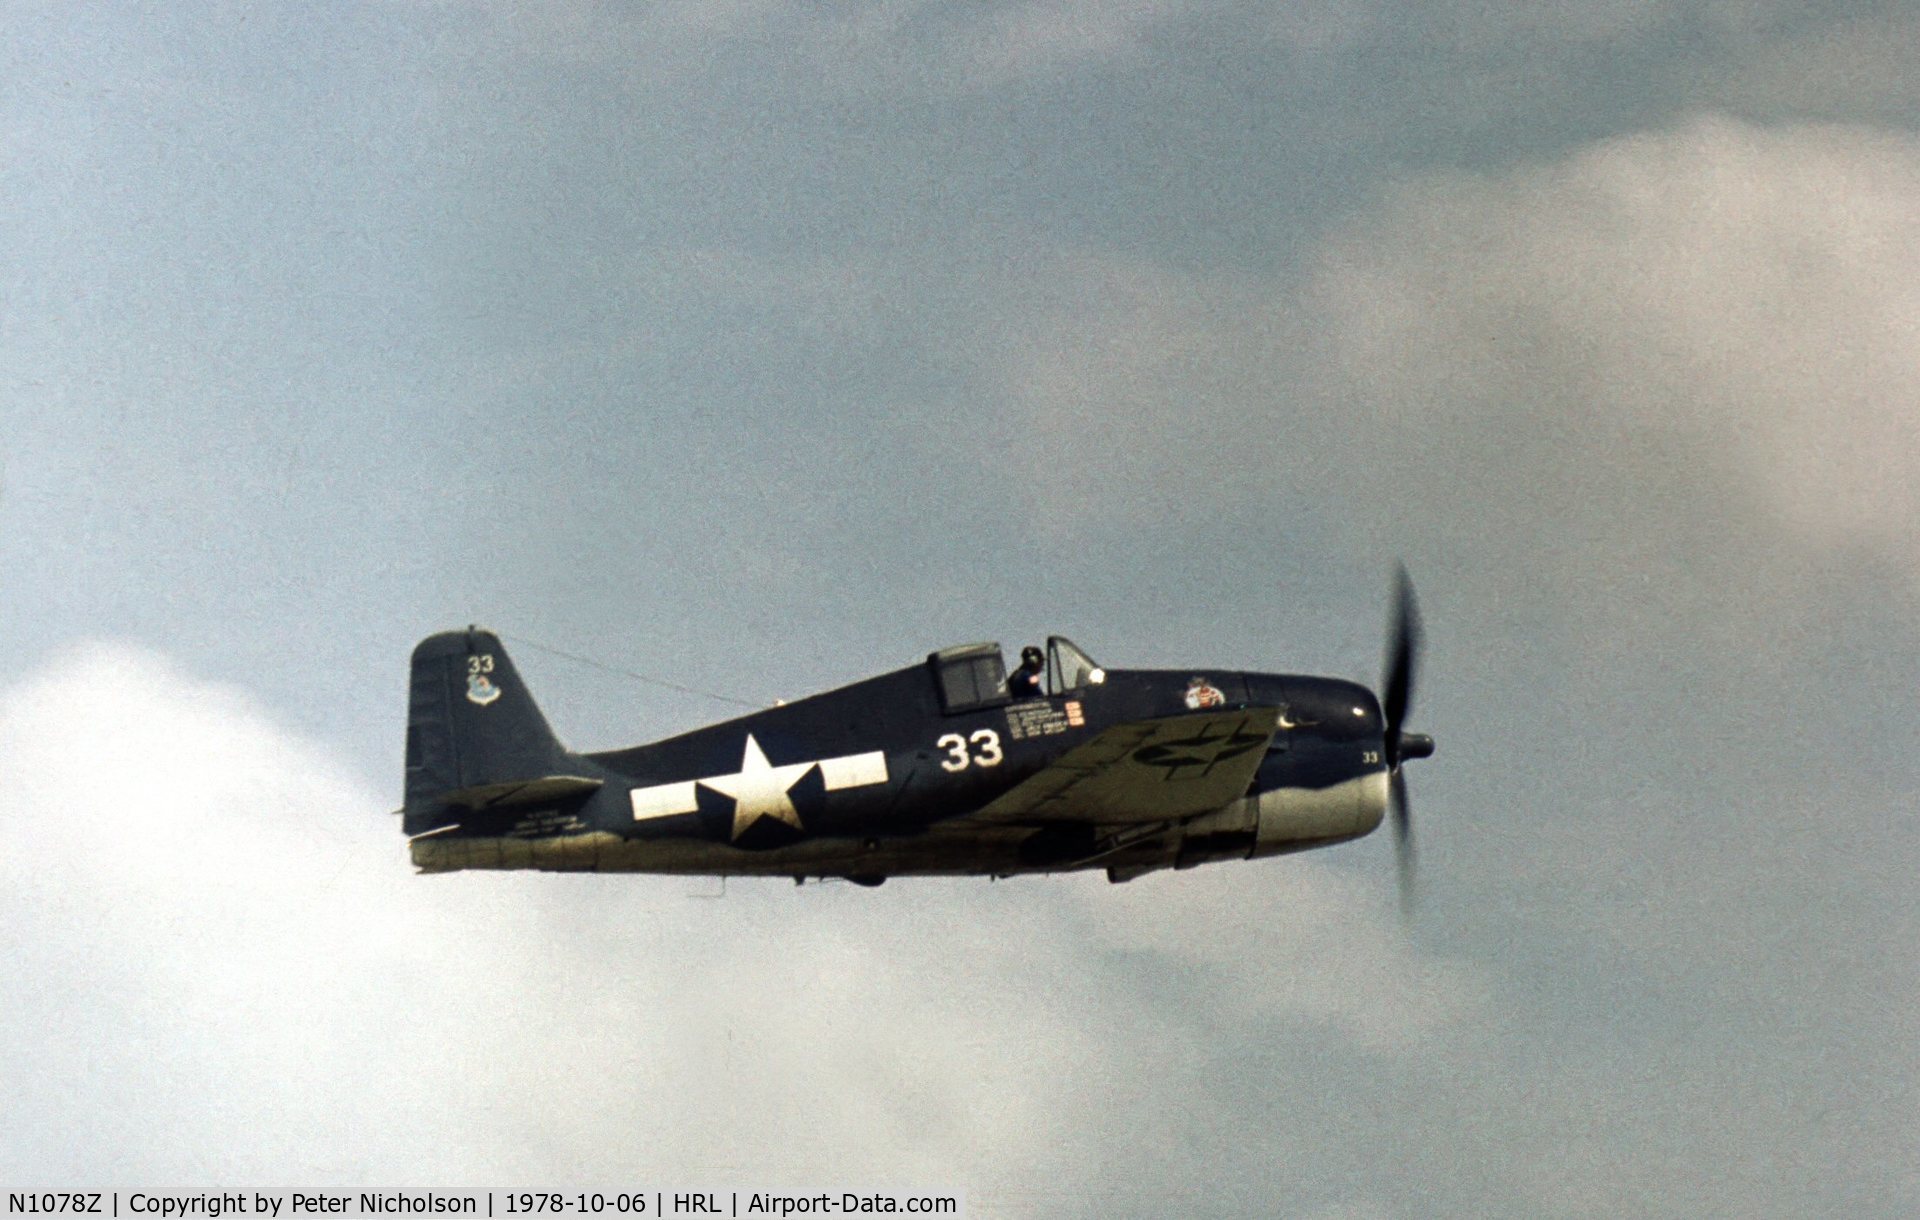 N1078Z, 1963 Grumman F6F-5 Hellcat C/N 27354801-66, Another view of the Confederate Air Force Hellcat at the 1978 Harlingen Airshow.